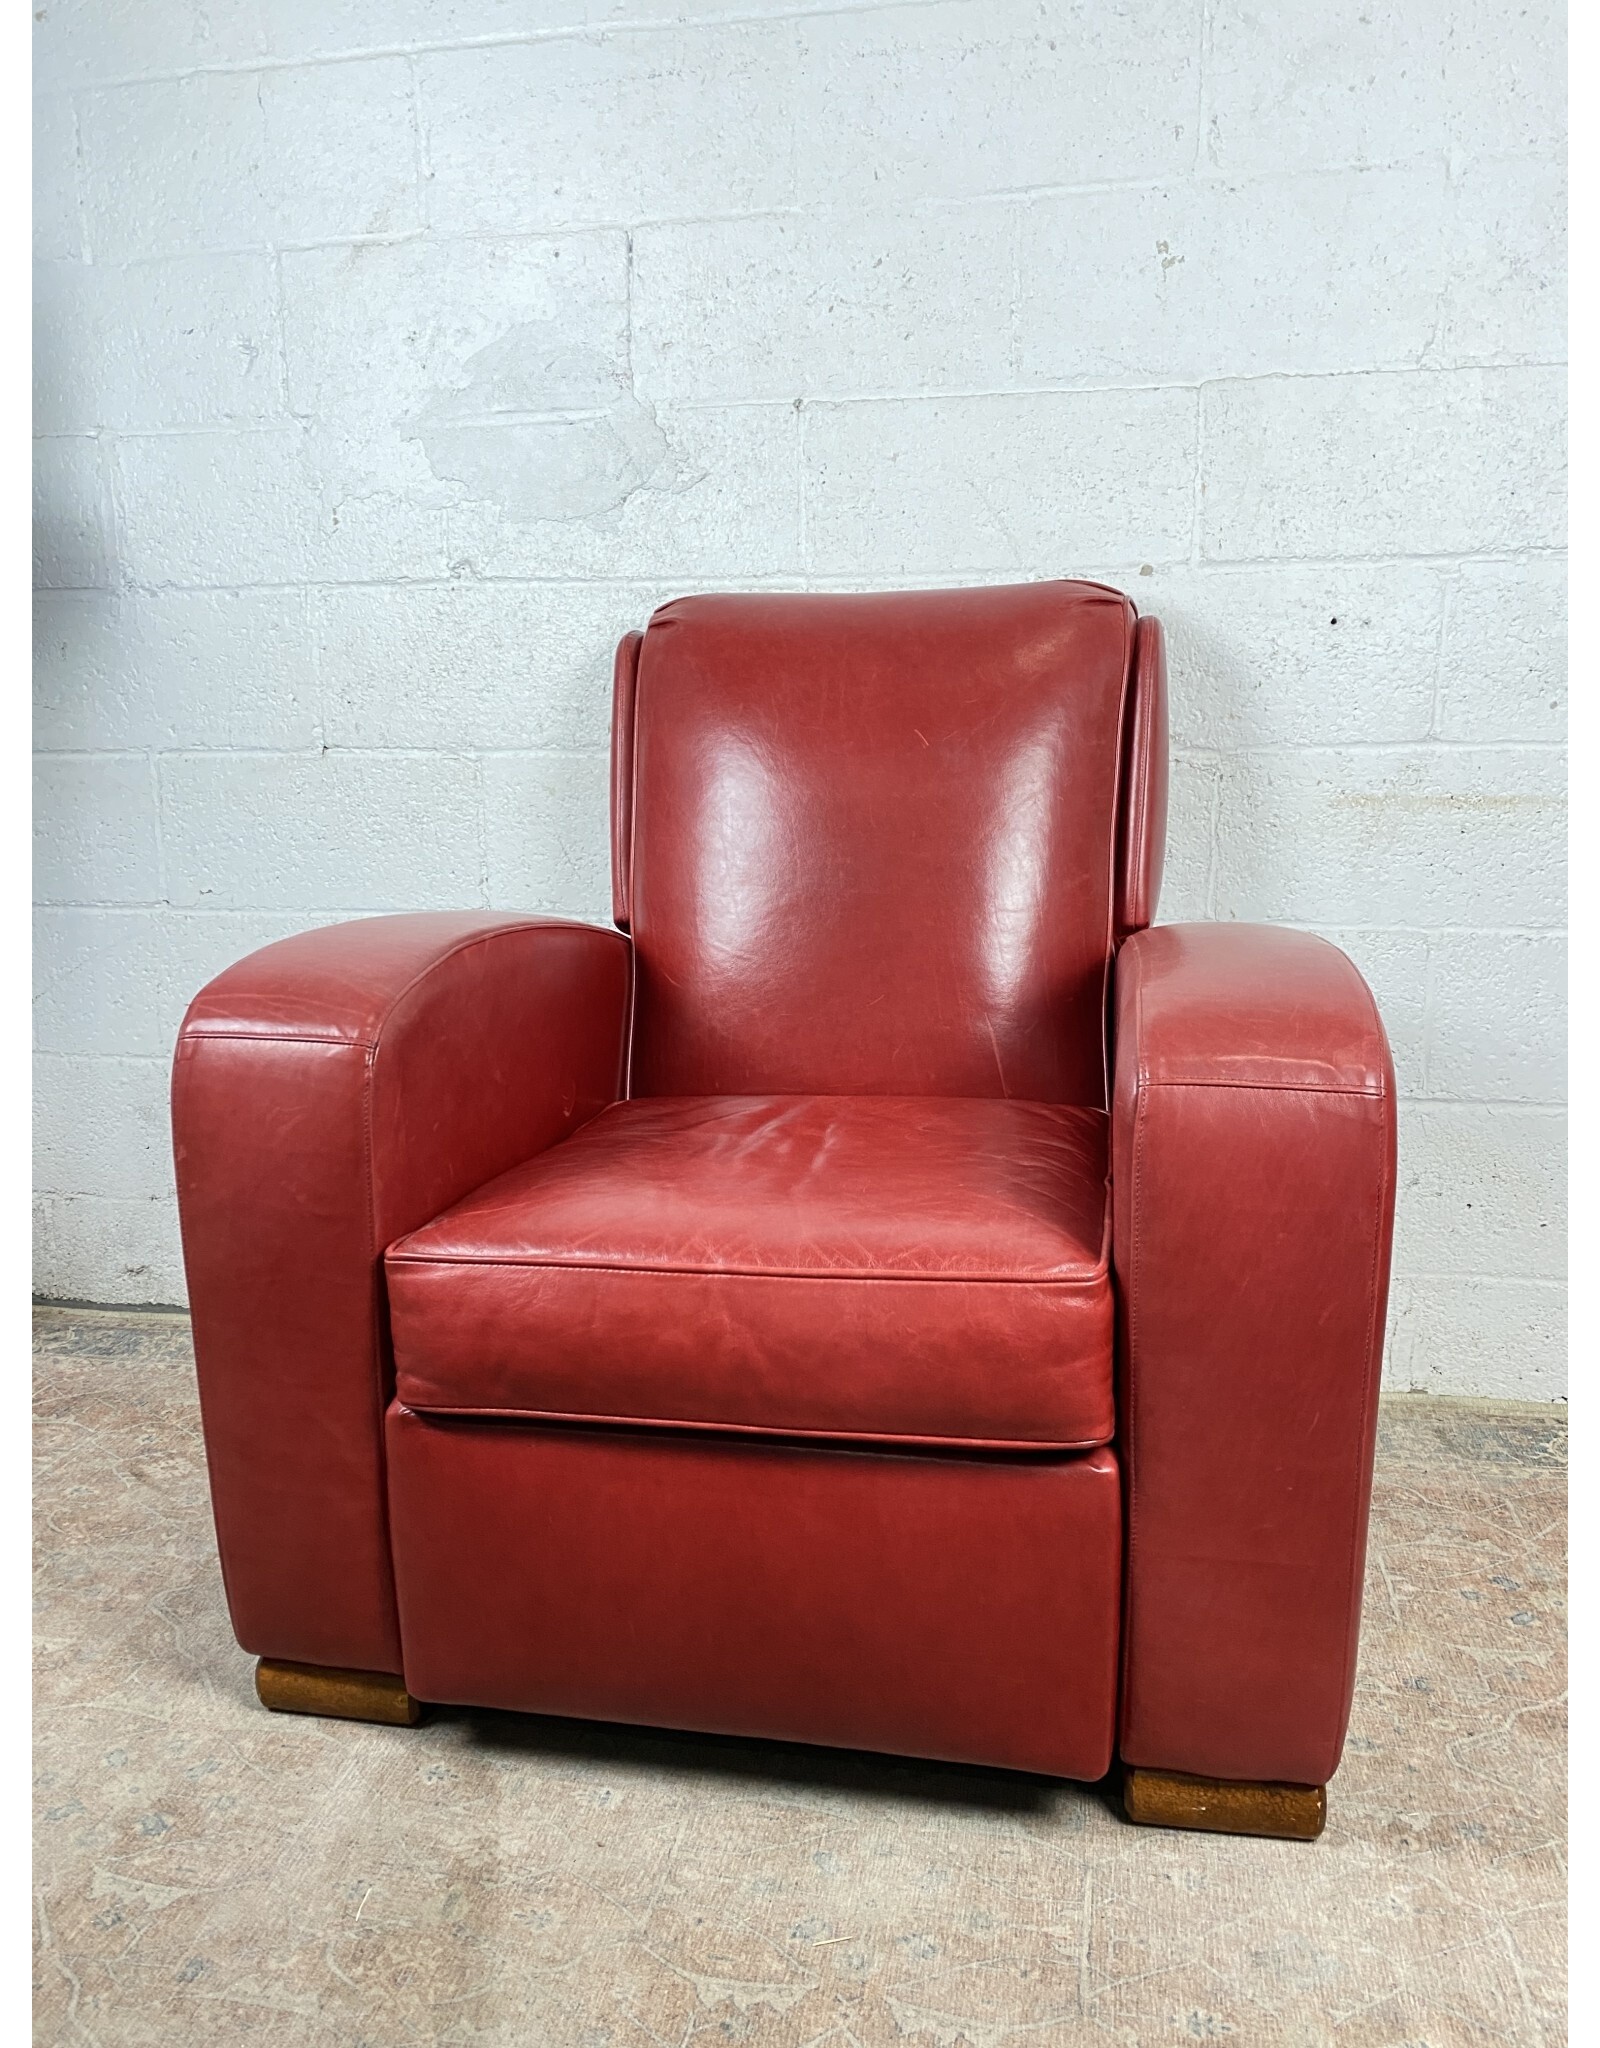 Vintage Style Cherry Red Aniline Leather Recliner